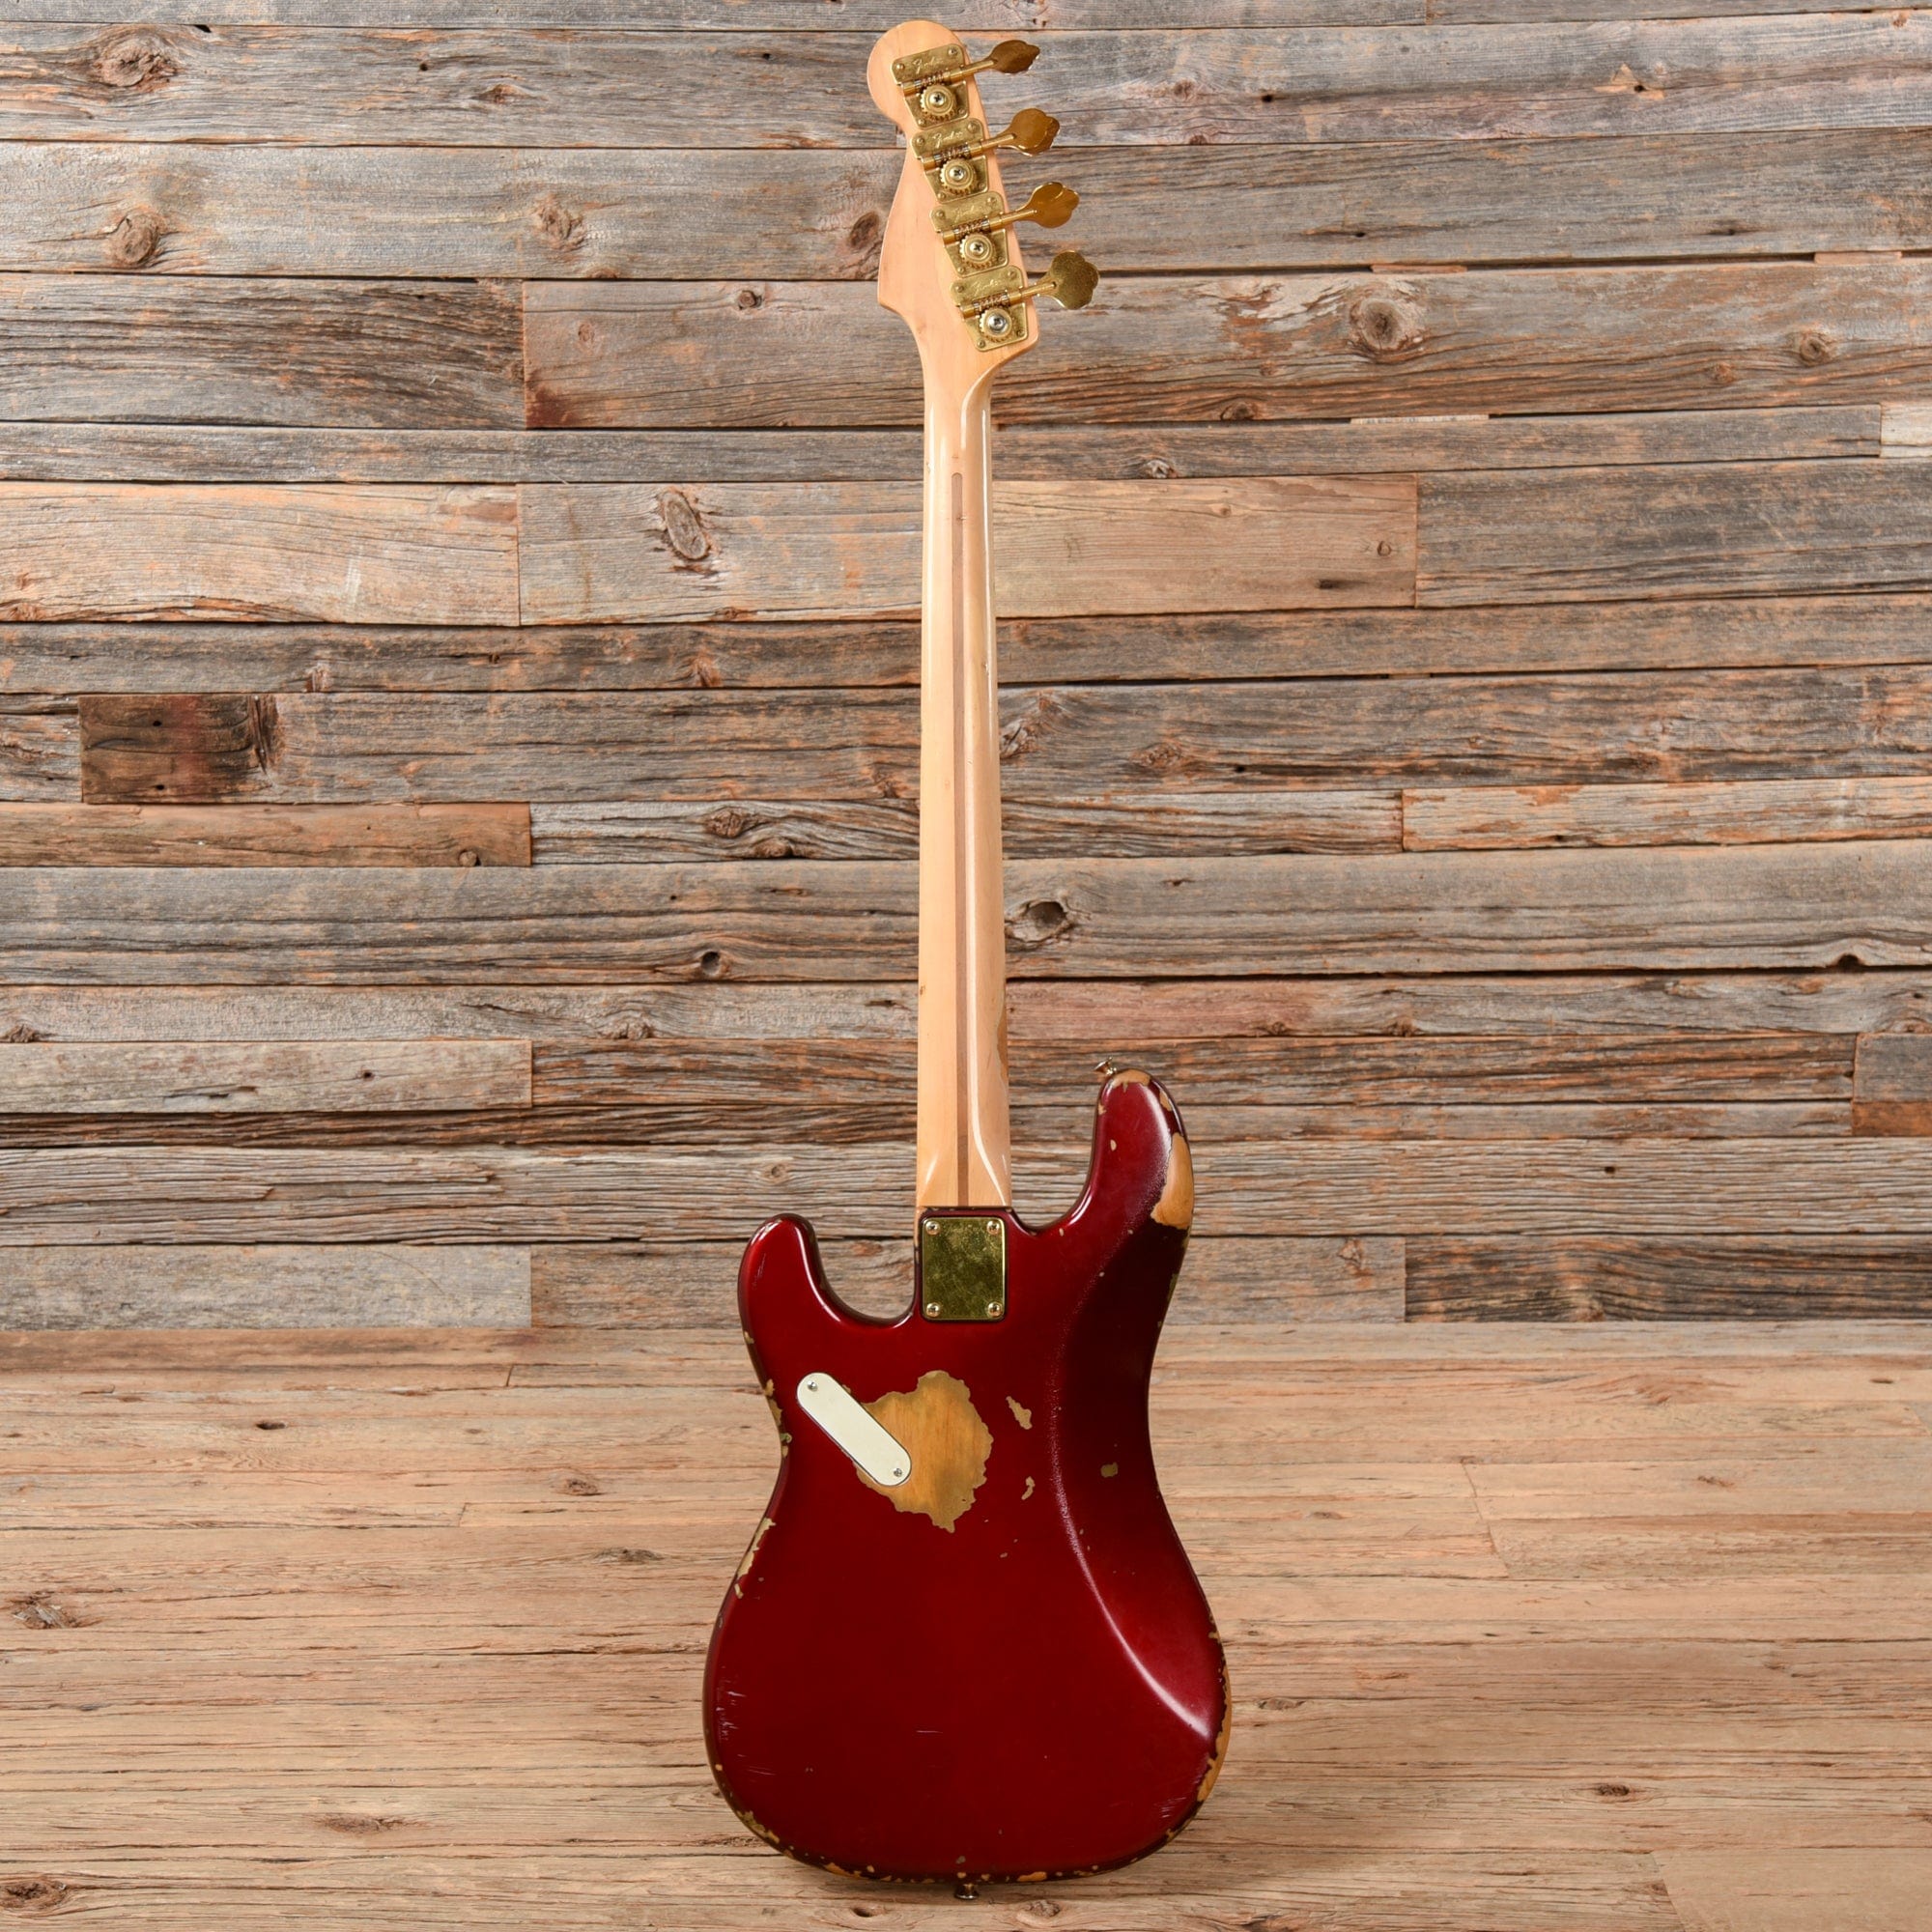 Fender Precision Bass Special Candy Apple Red 1988 Bass Guitars / 4-String